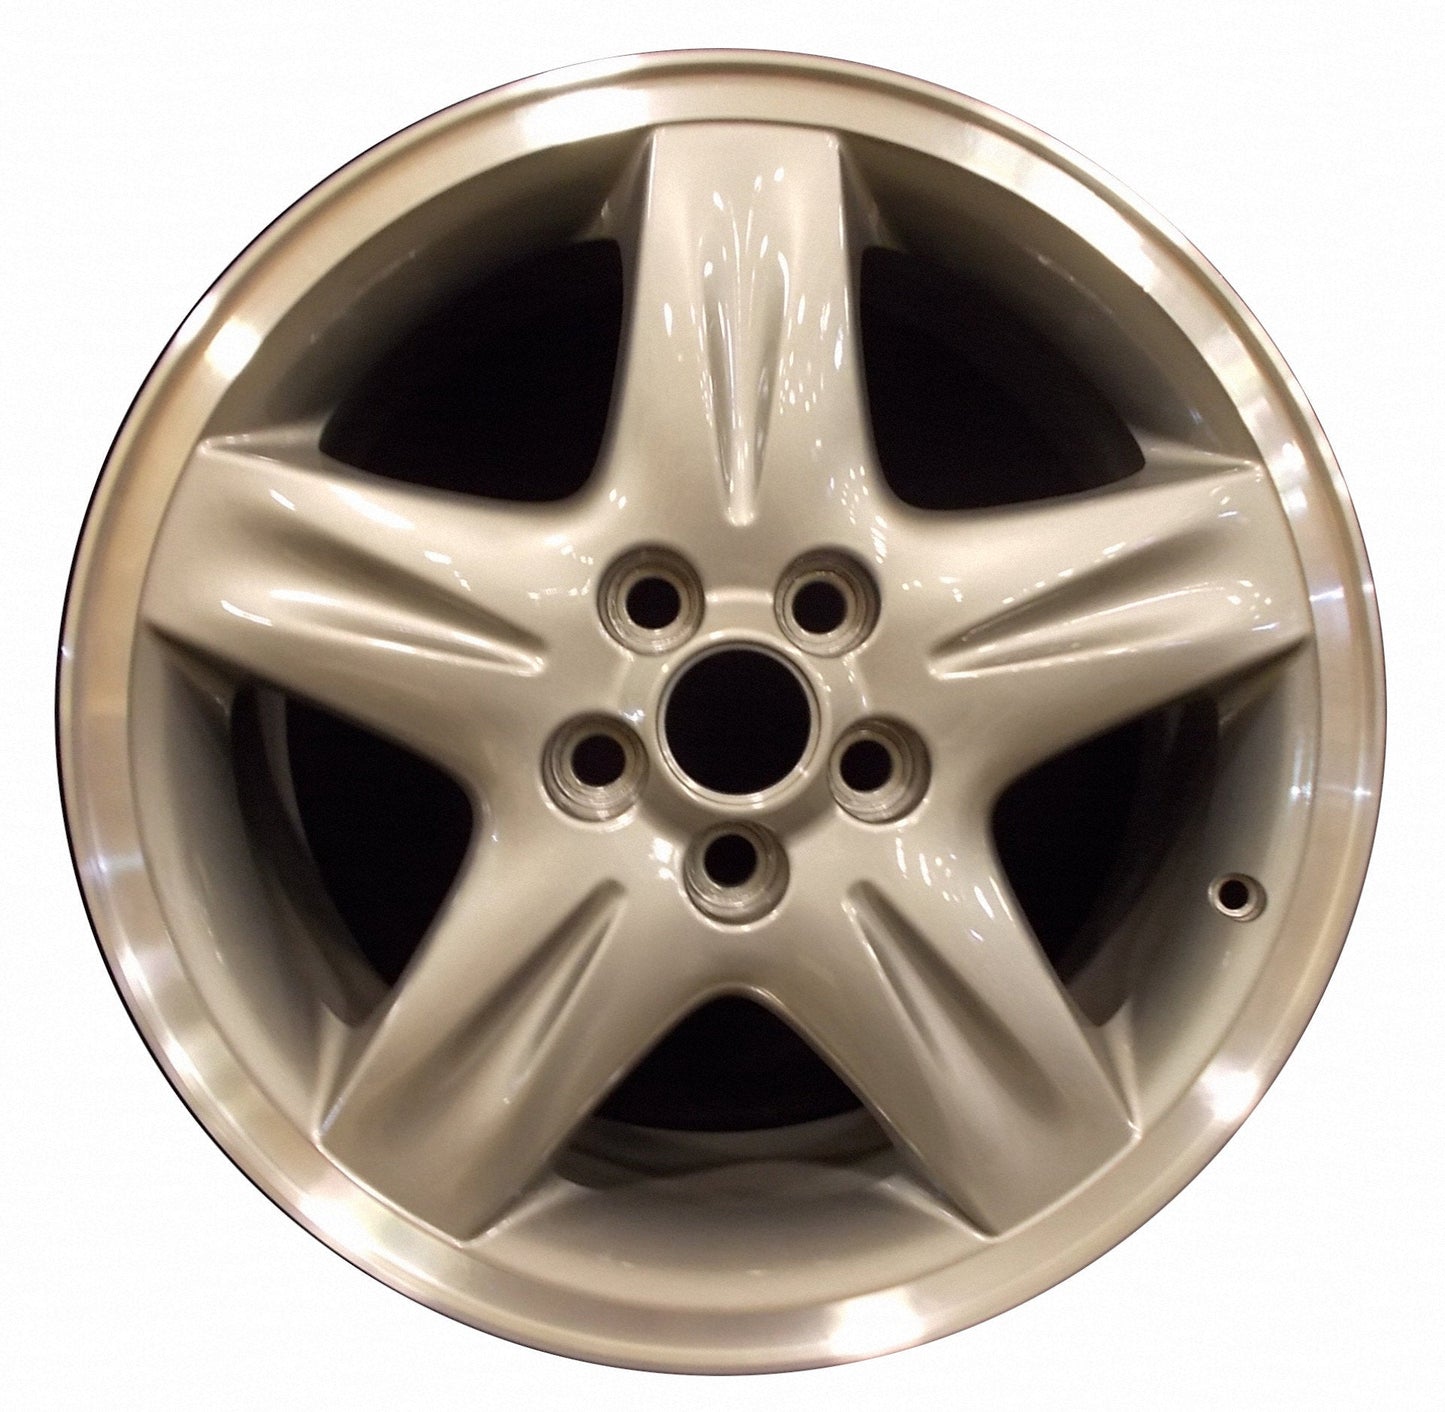 Lincoln LS  2001, 2002, 2003, 2004, 2005 Factory OEM Car Wheel Size 17x7.5 Alloy WAO.3445A.LC21.FC